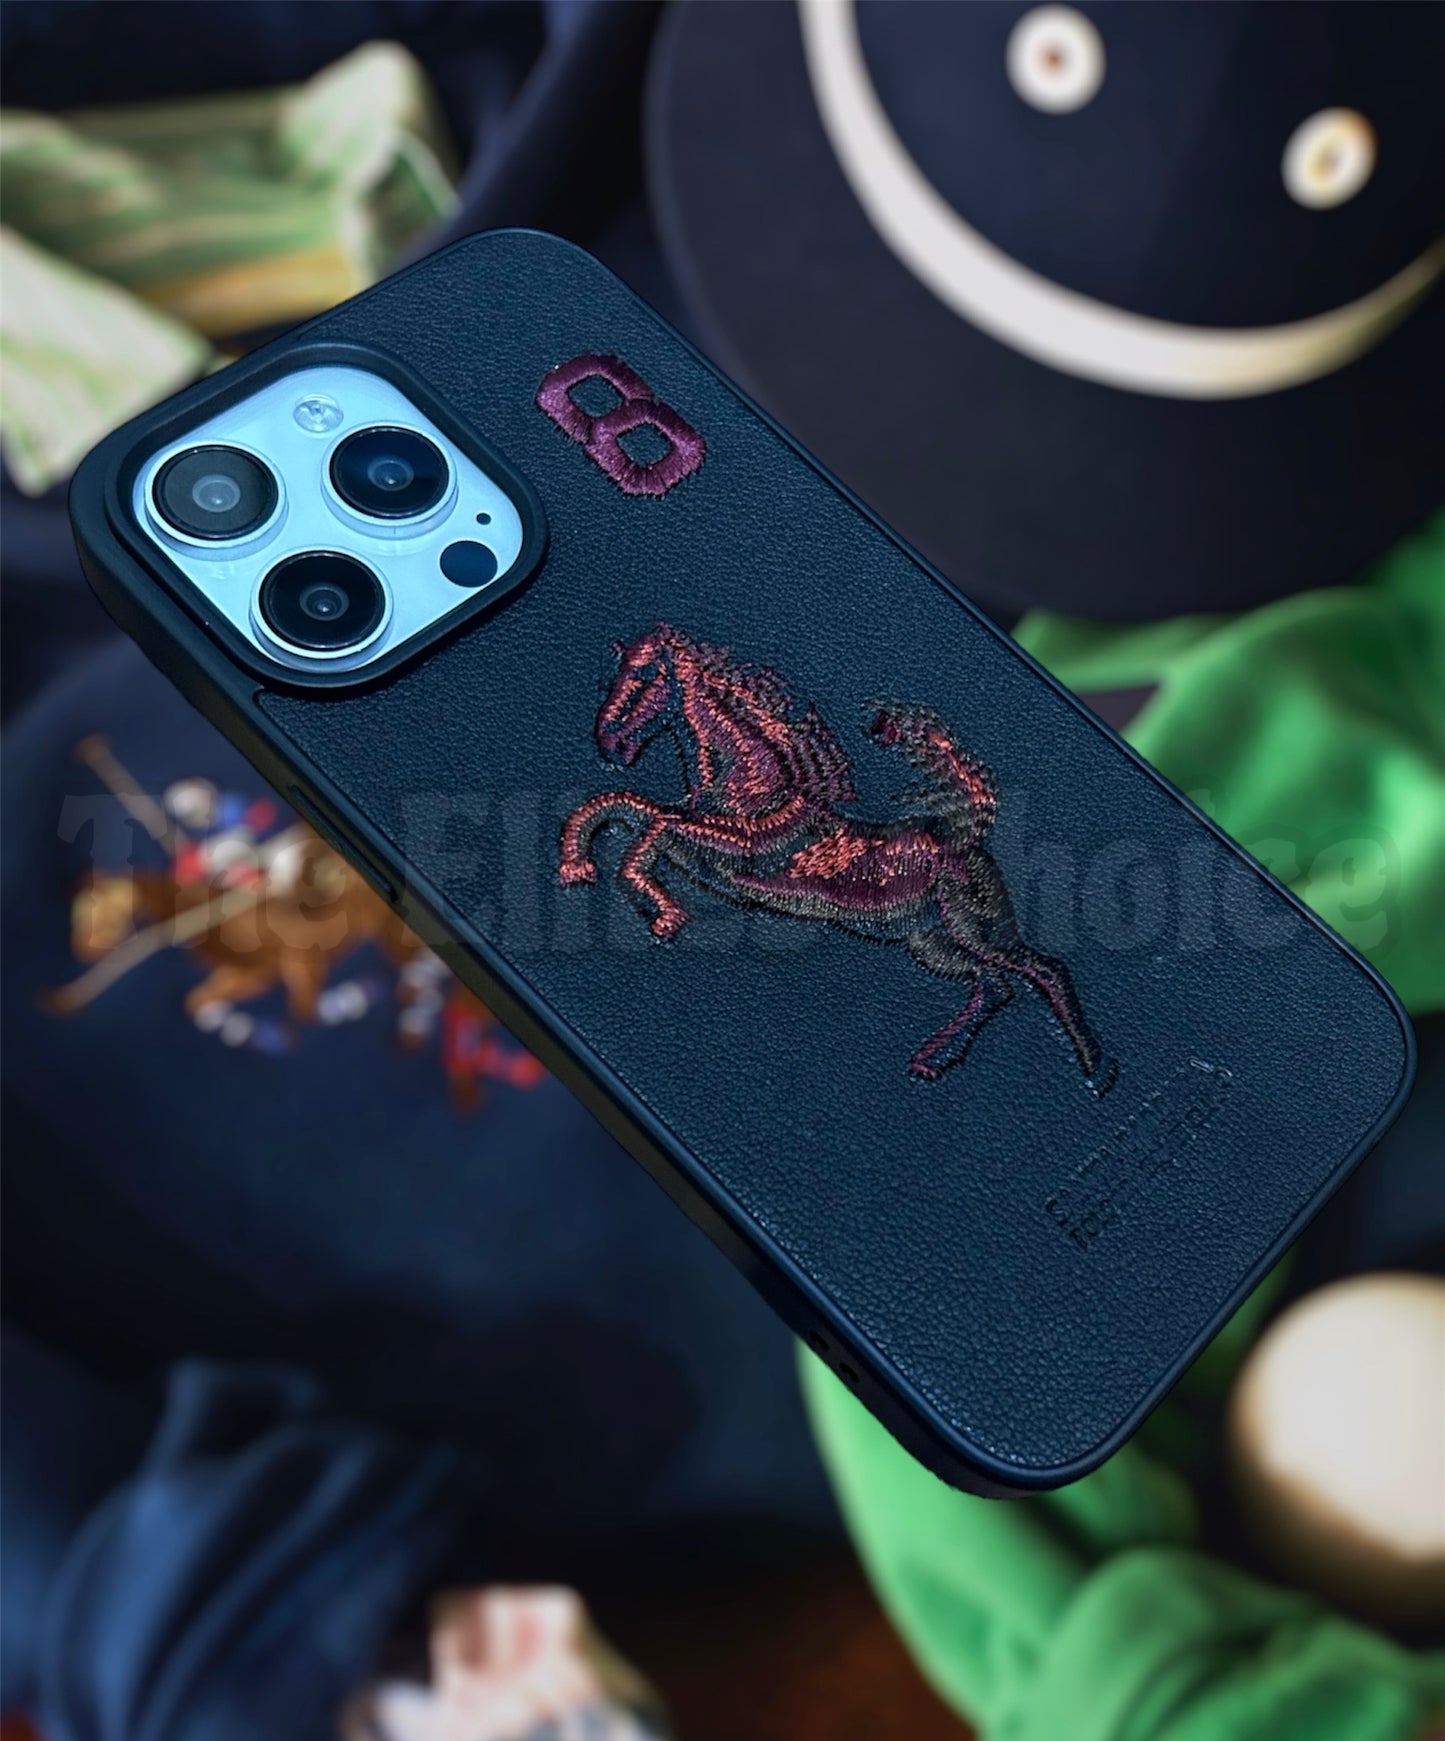 POLO iPhone cases